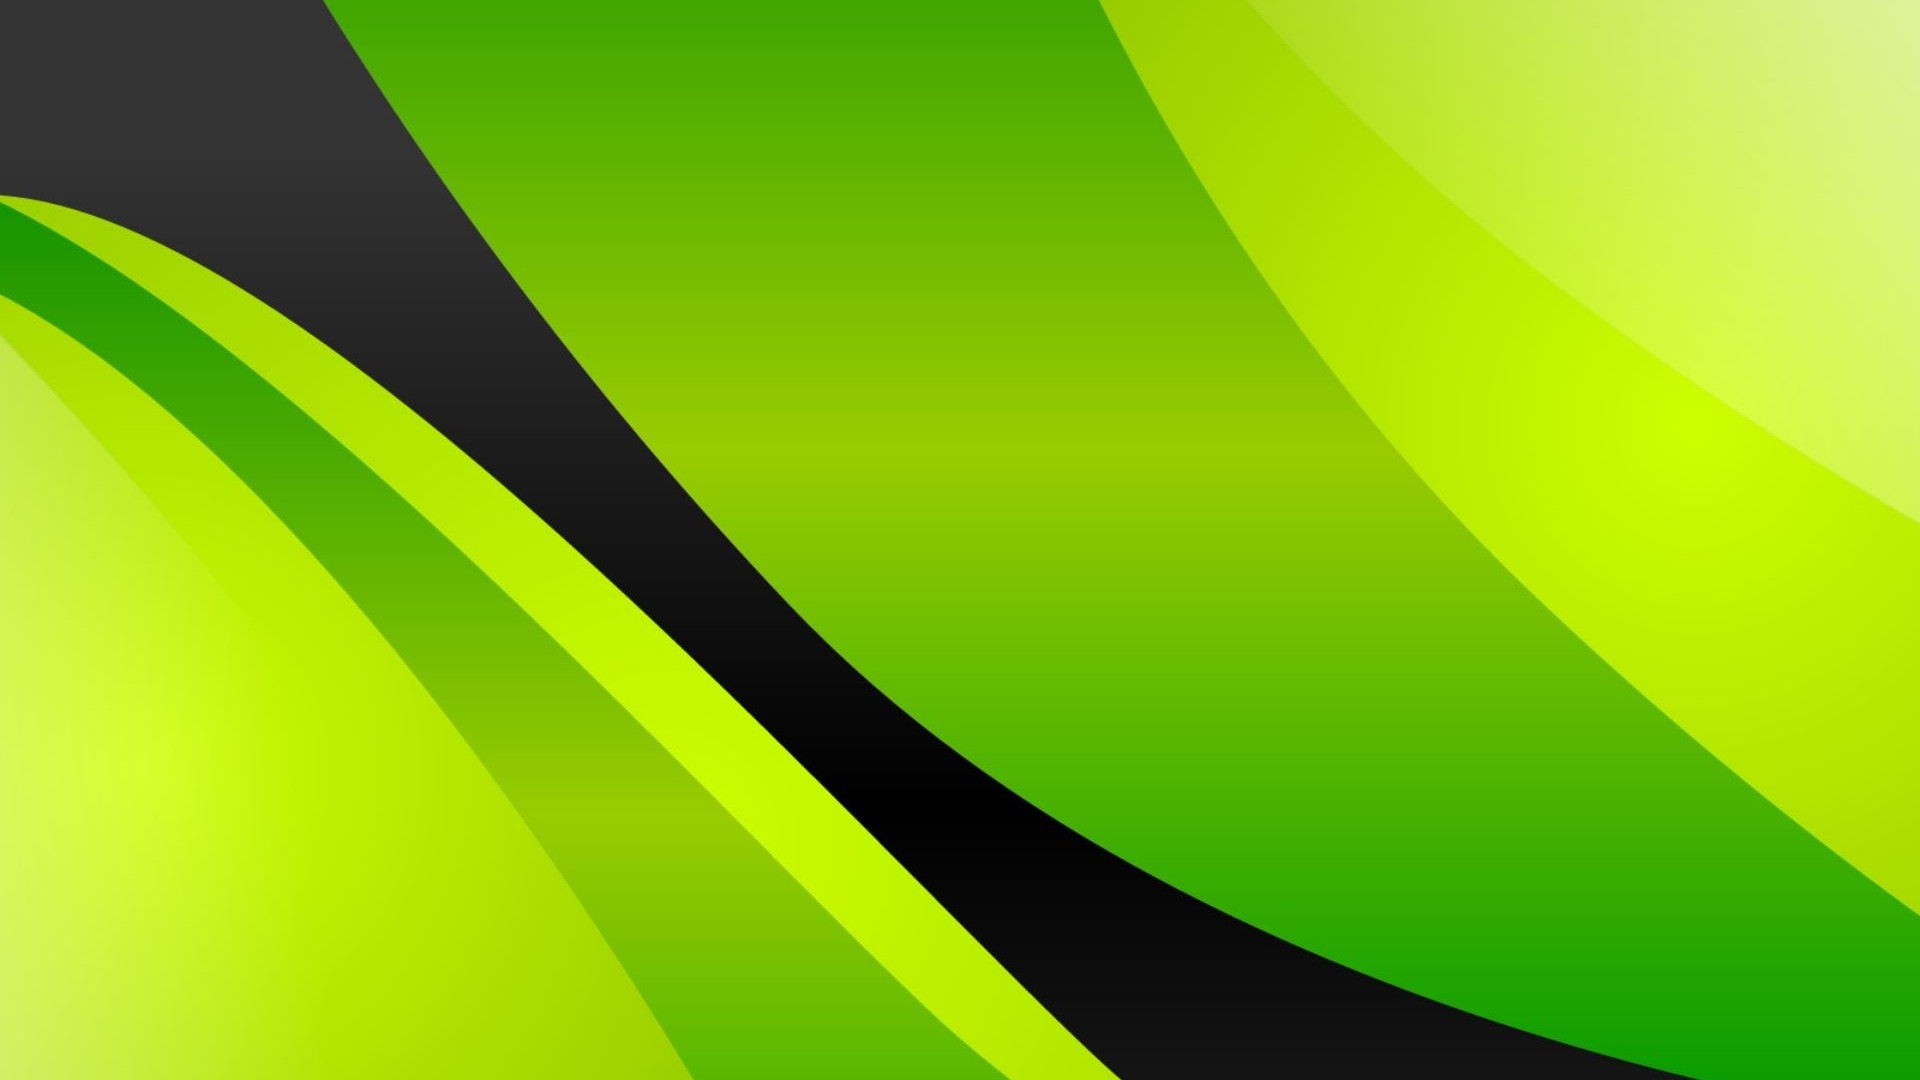 Free Download Green Abstract Wallpaper 1920x1080 Green Abstract [1920x1080] For Your Desktop